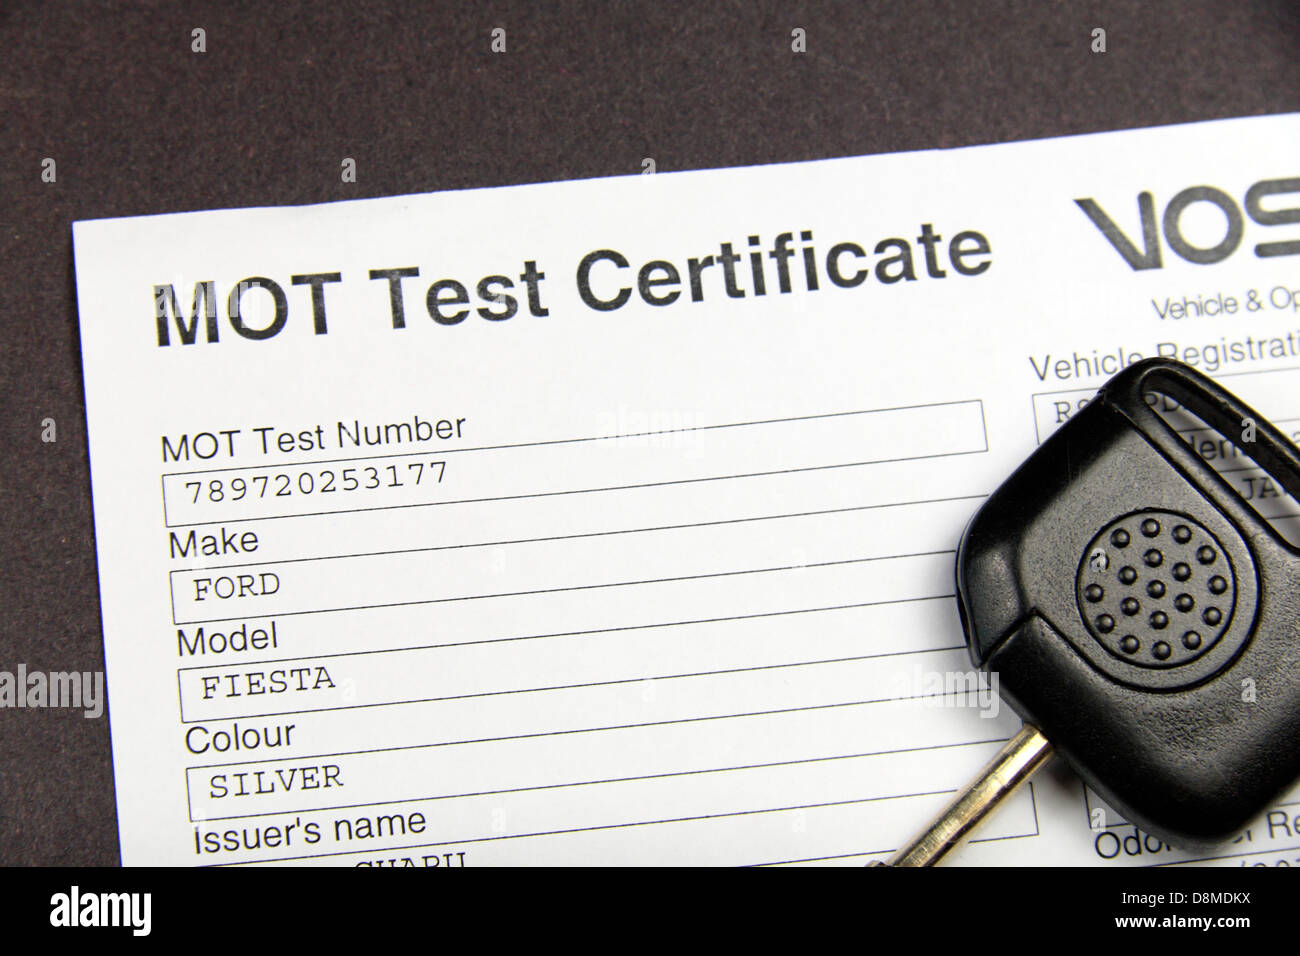 A British MOT Test certificate as issued by the VOSA (Vehicle & Operator Services Agency) in May 2013. Stock Photo